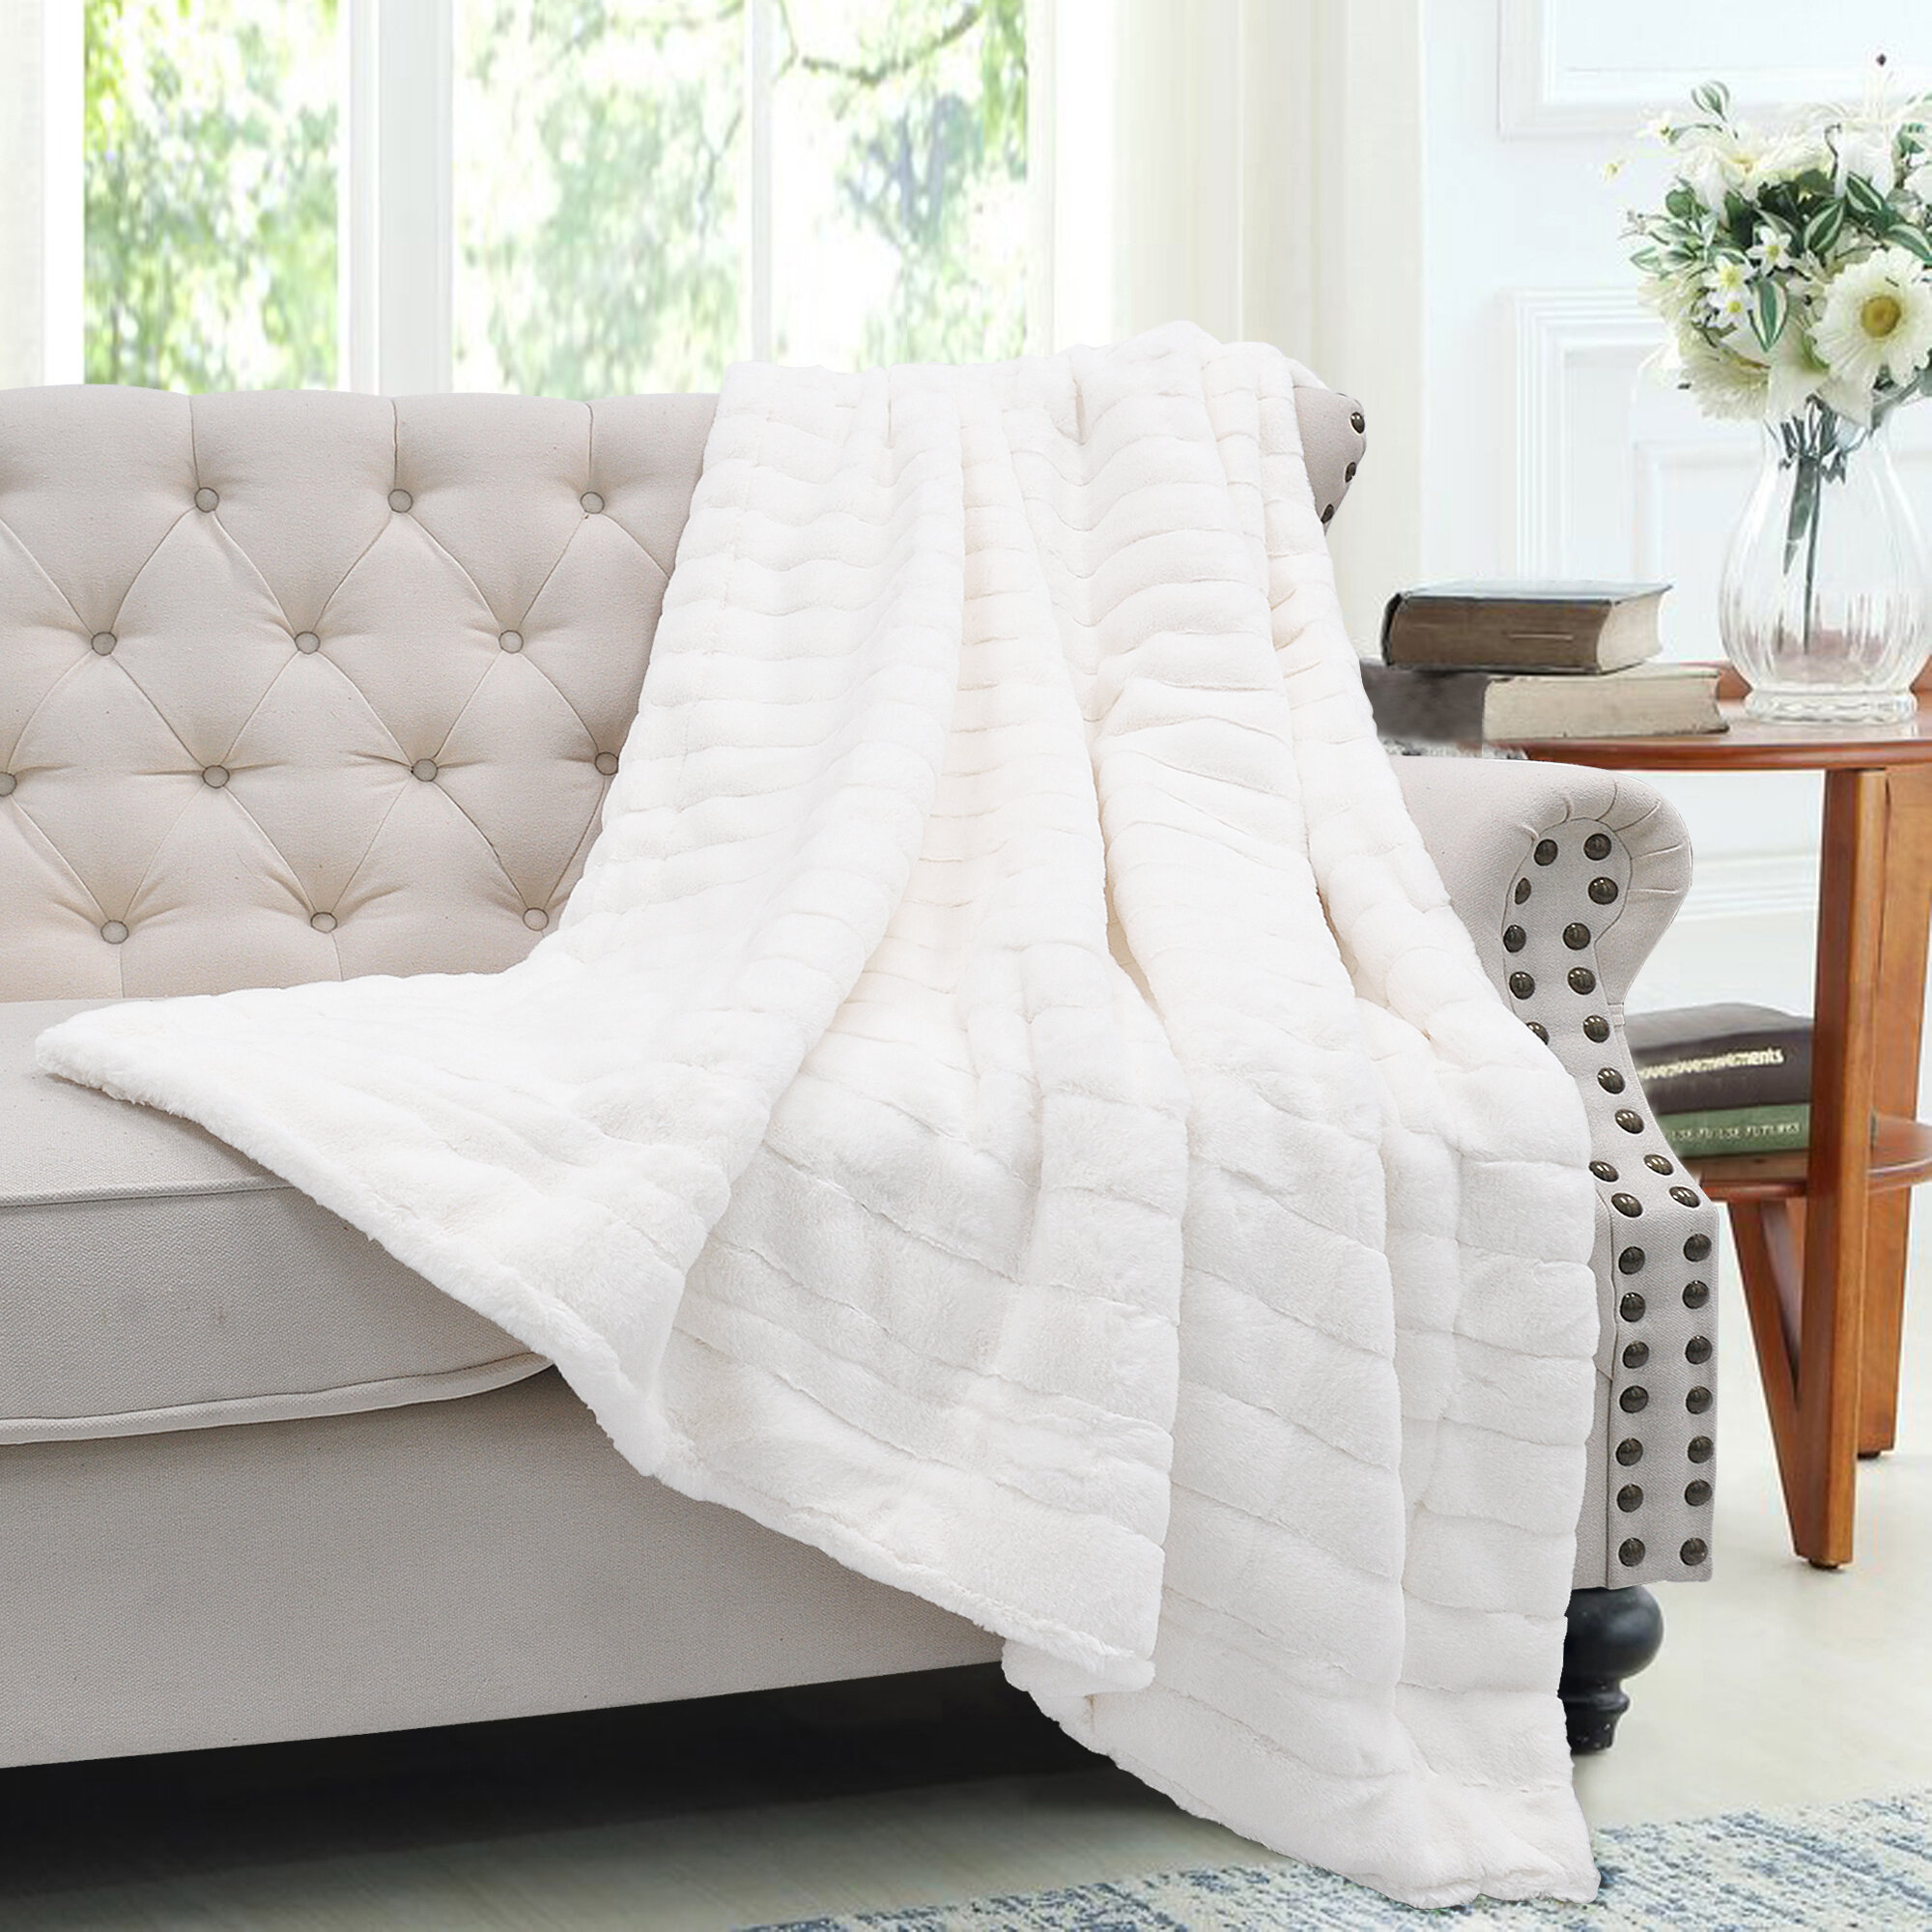 Big Blanket Co. Classic Knitted Oversized Throw Blanket